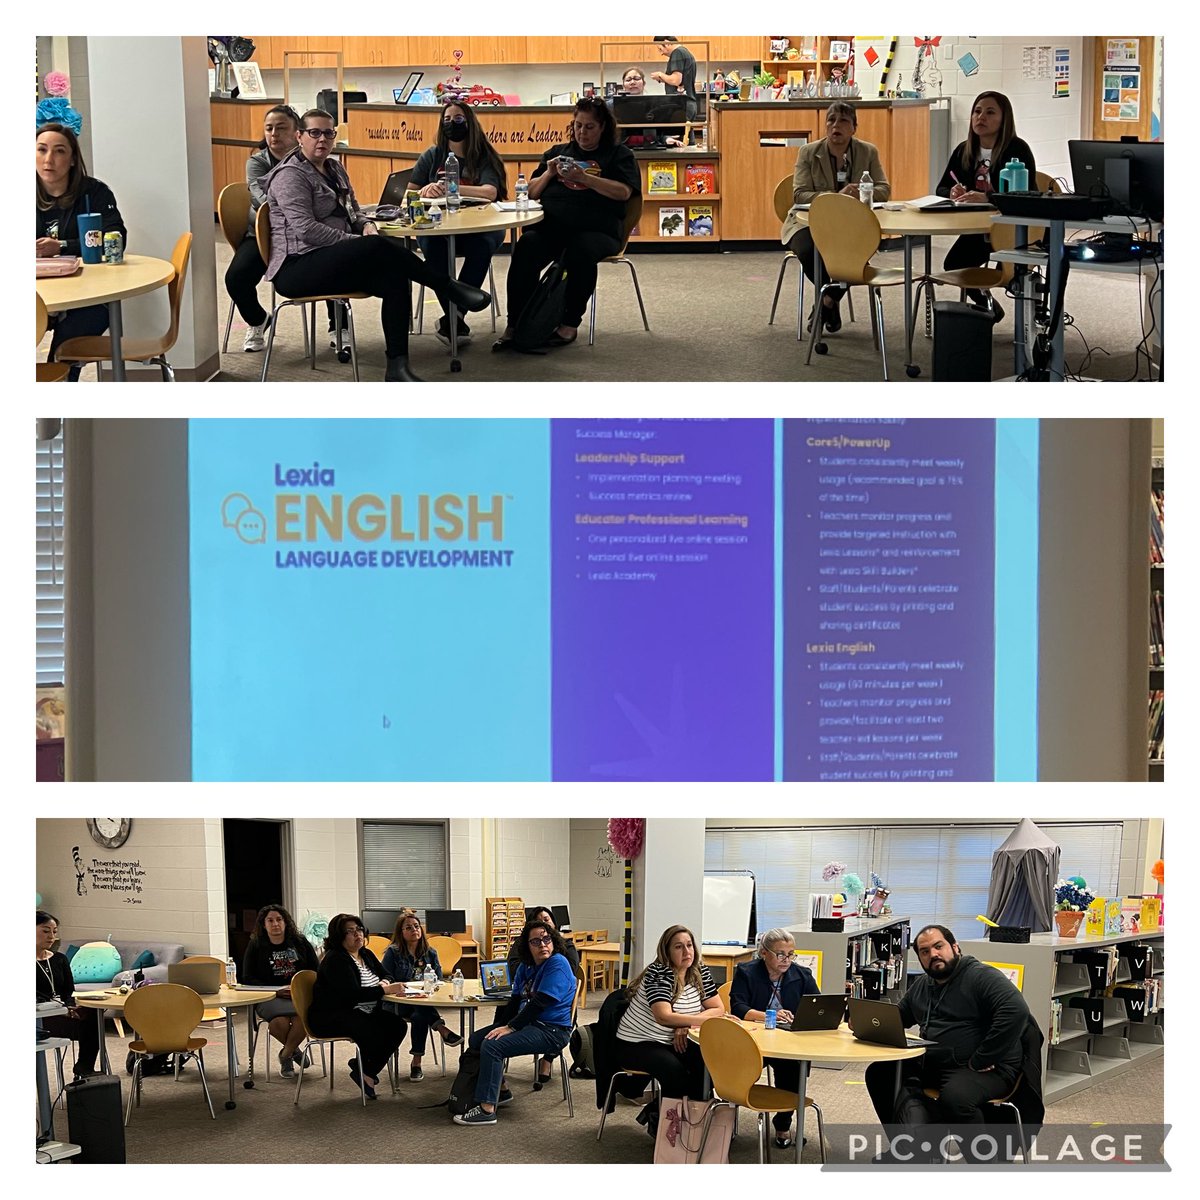 Getting ready for Lexia English! Let’s do this! Thank you, amazing bilingual teachers at O’Shea Keleher for always doing what is in the best interest of students! 💜💛 #TeamSISD #PowerOfYet